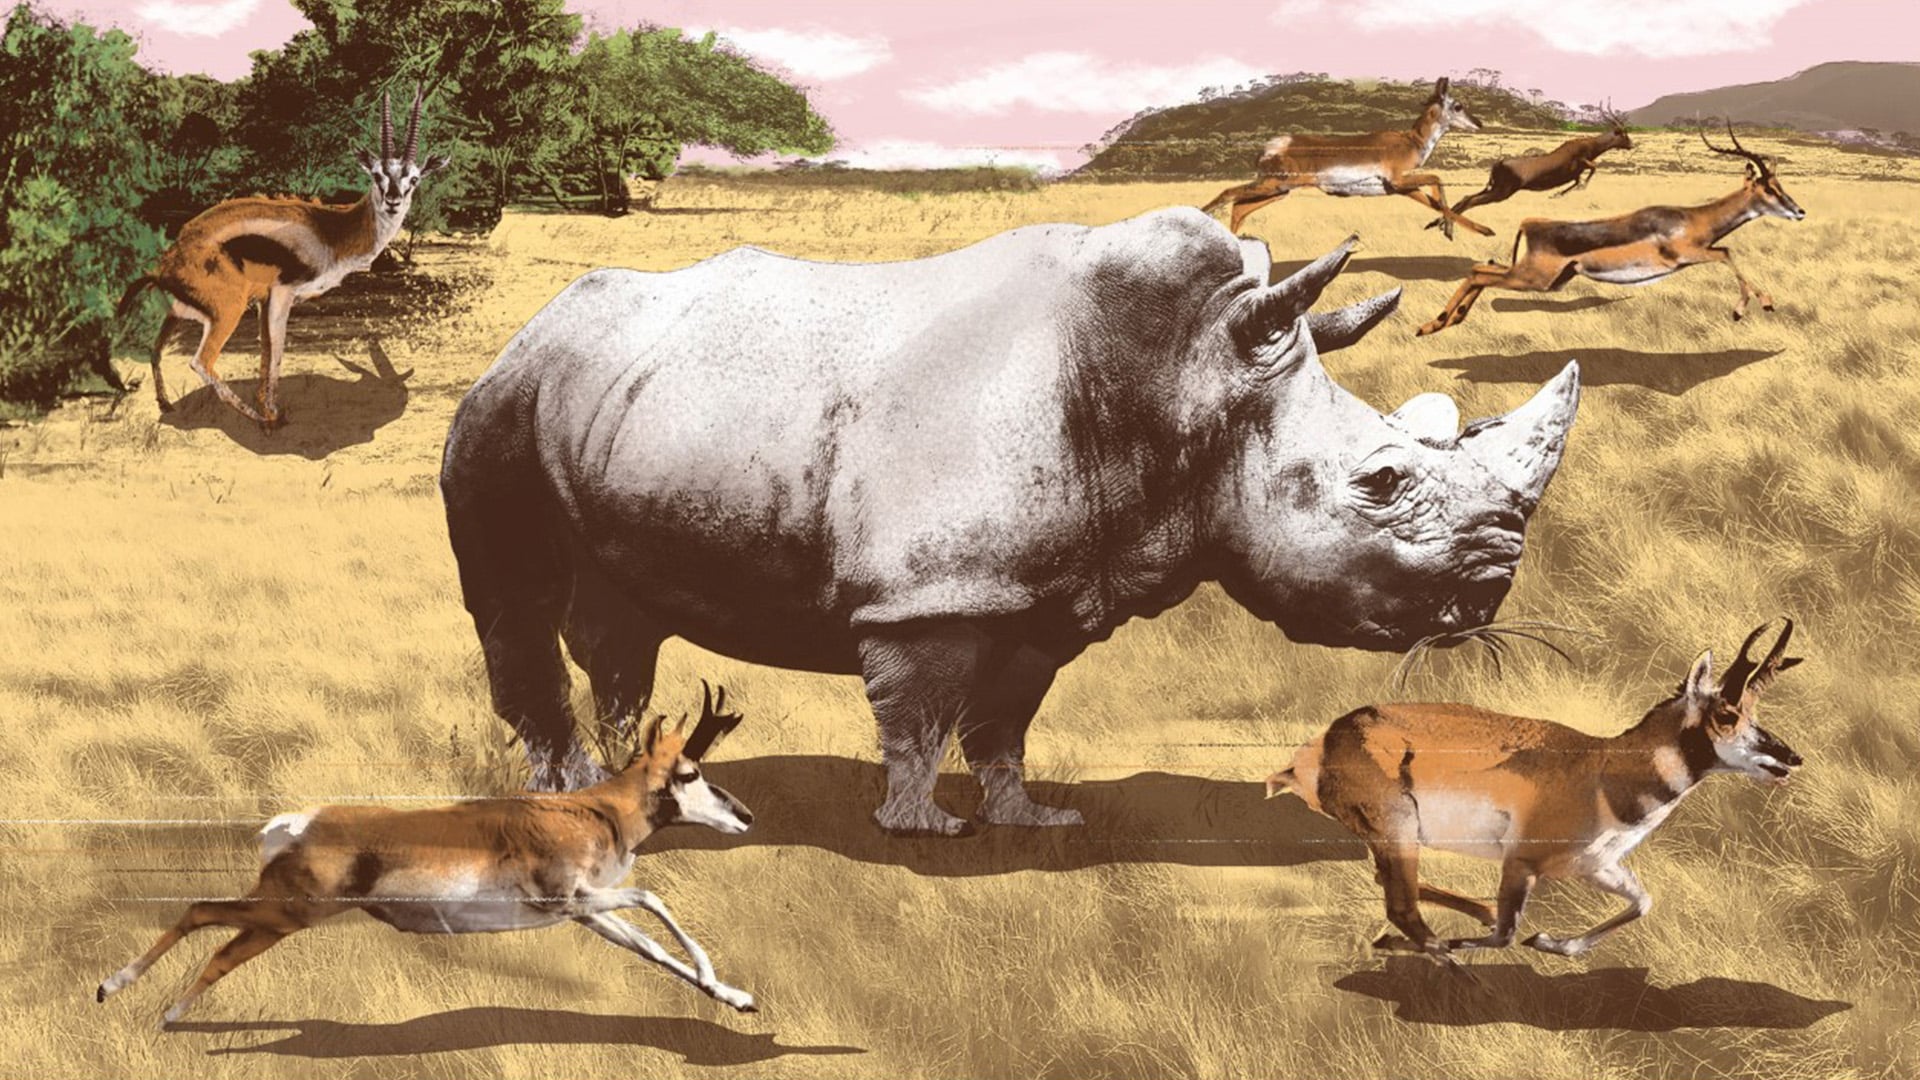 Illustration featuring a happy rhinoceros watching gazelles panic and run past